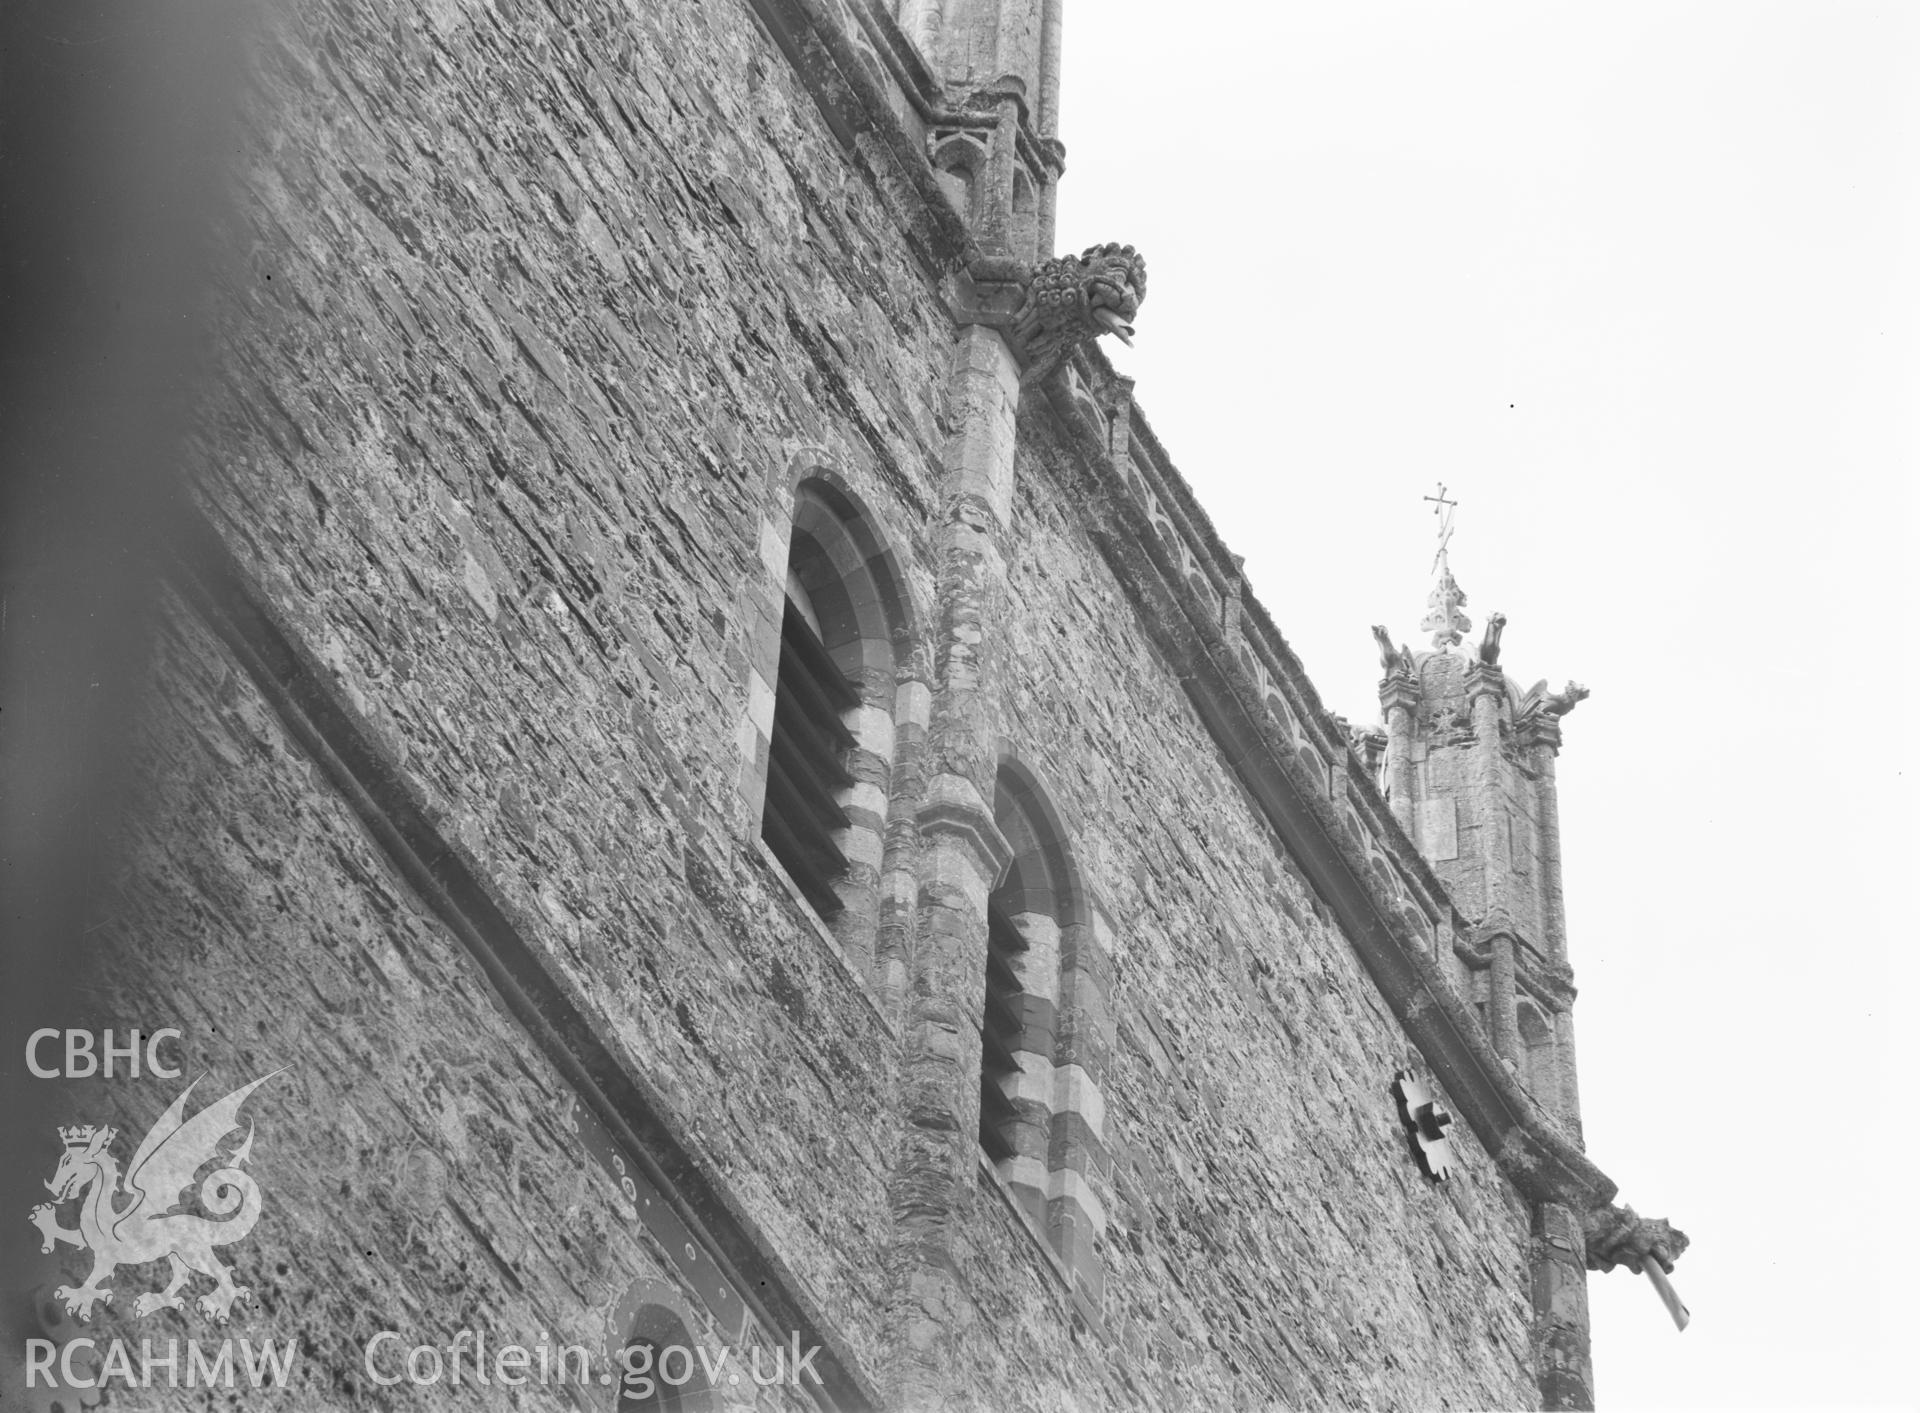 Digital copy of a black and white acetate negative showing detail view of windows at St. David's Cathedral, taken by E.W. Lovegrove, July 1936.